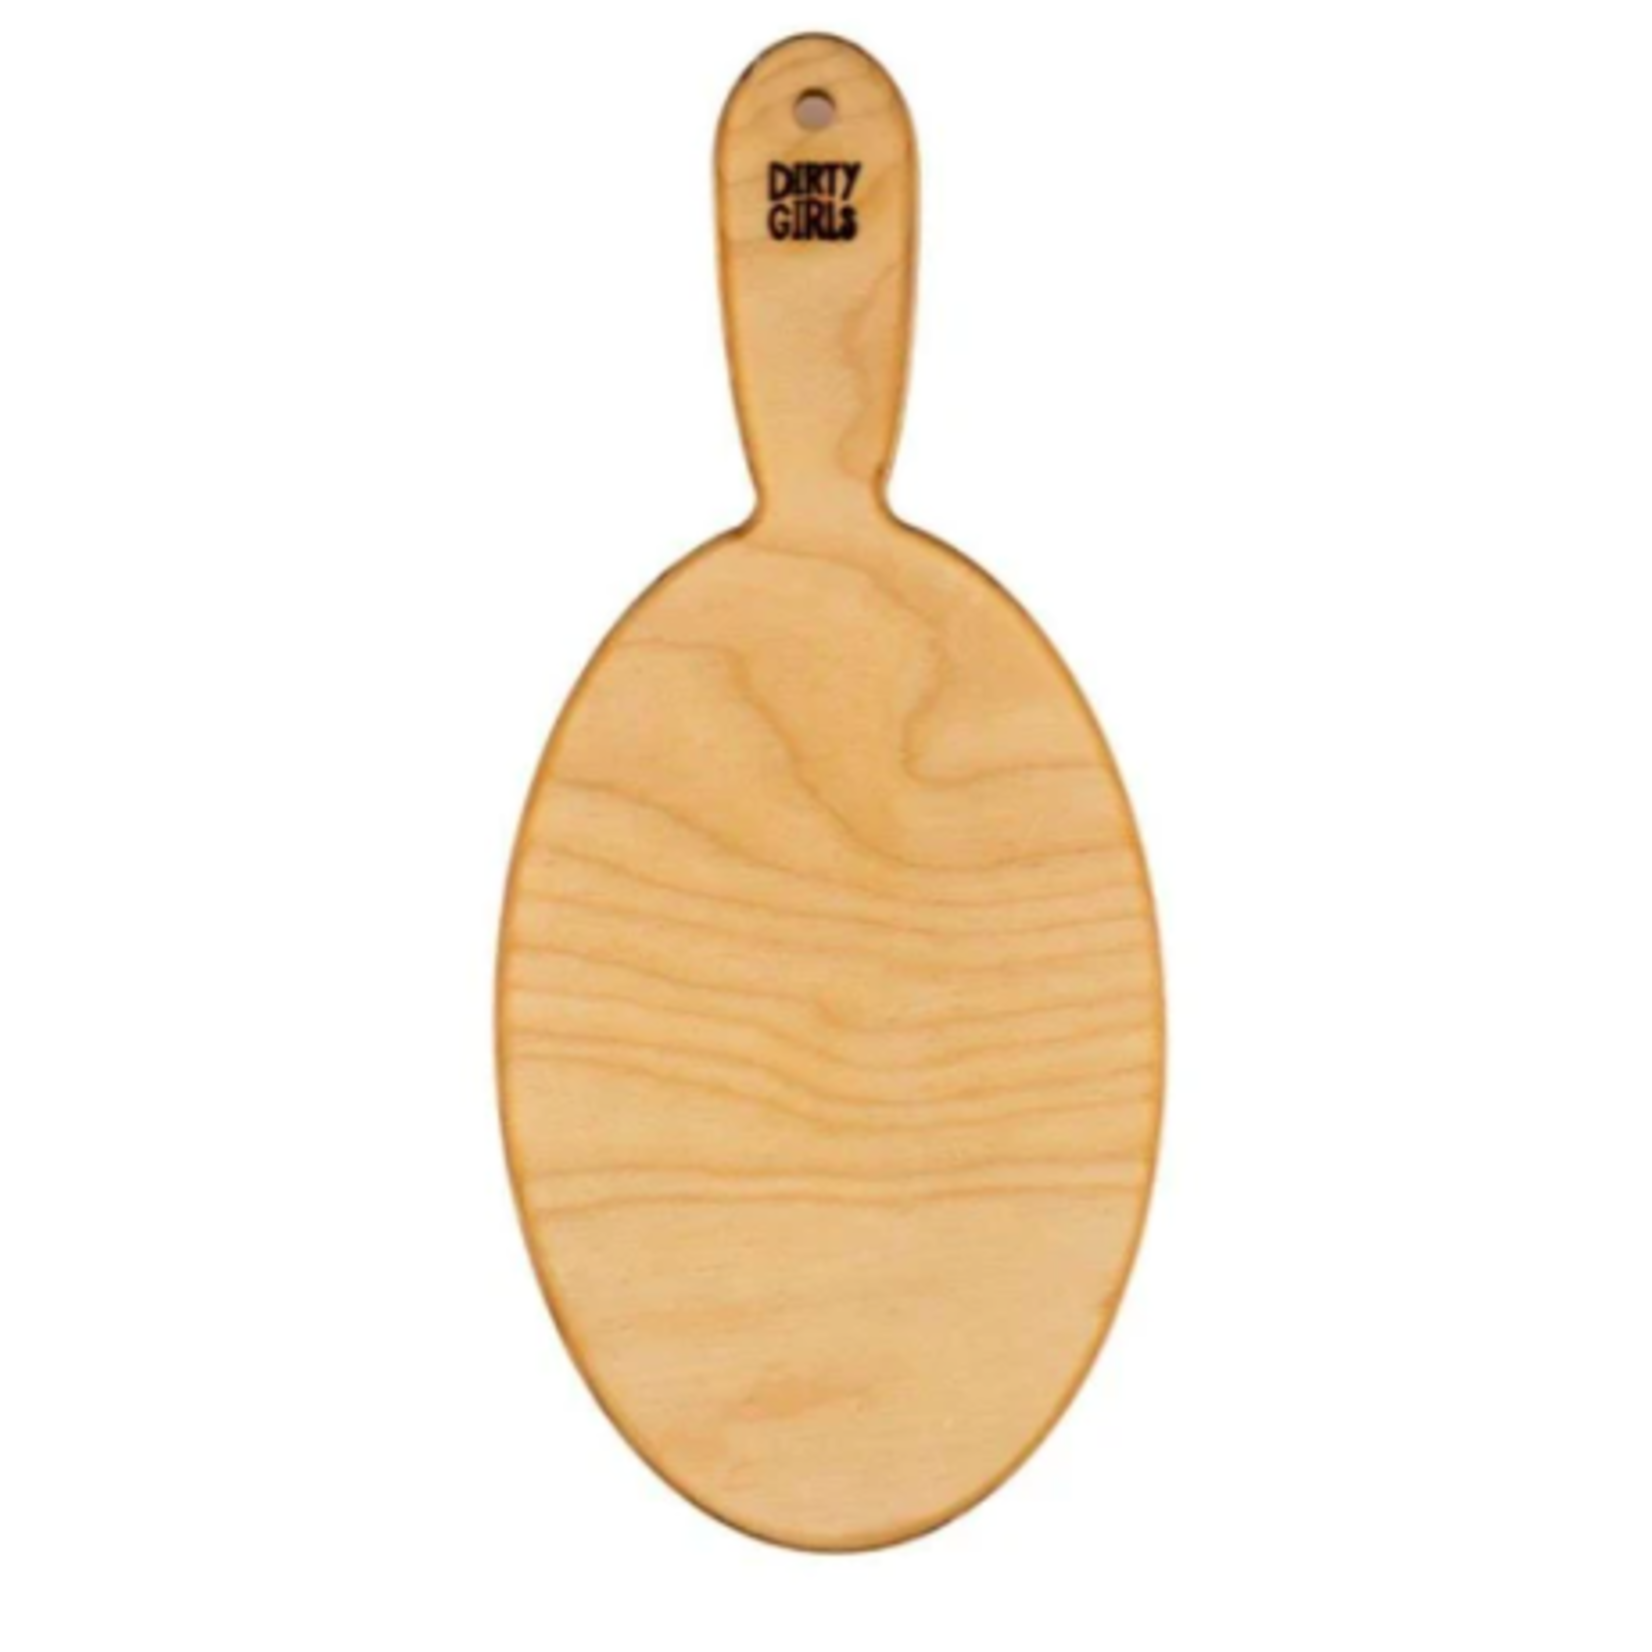 Dirty Girls 11" x 4.875" Large Oval Paddle